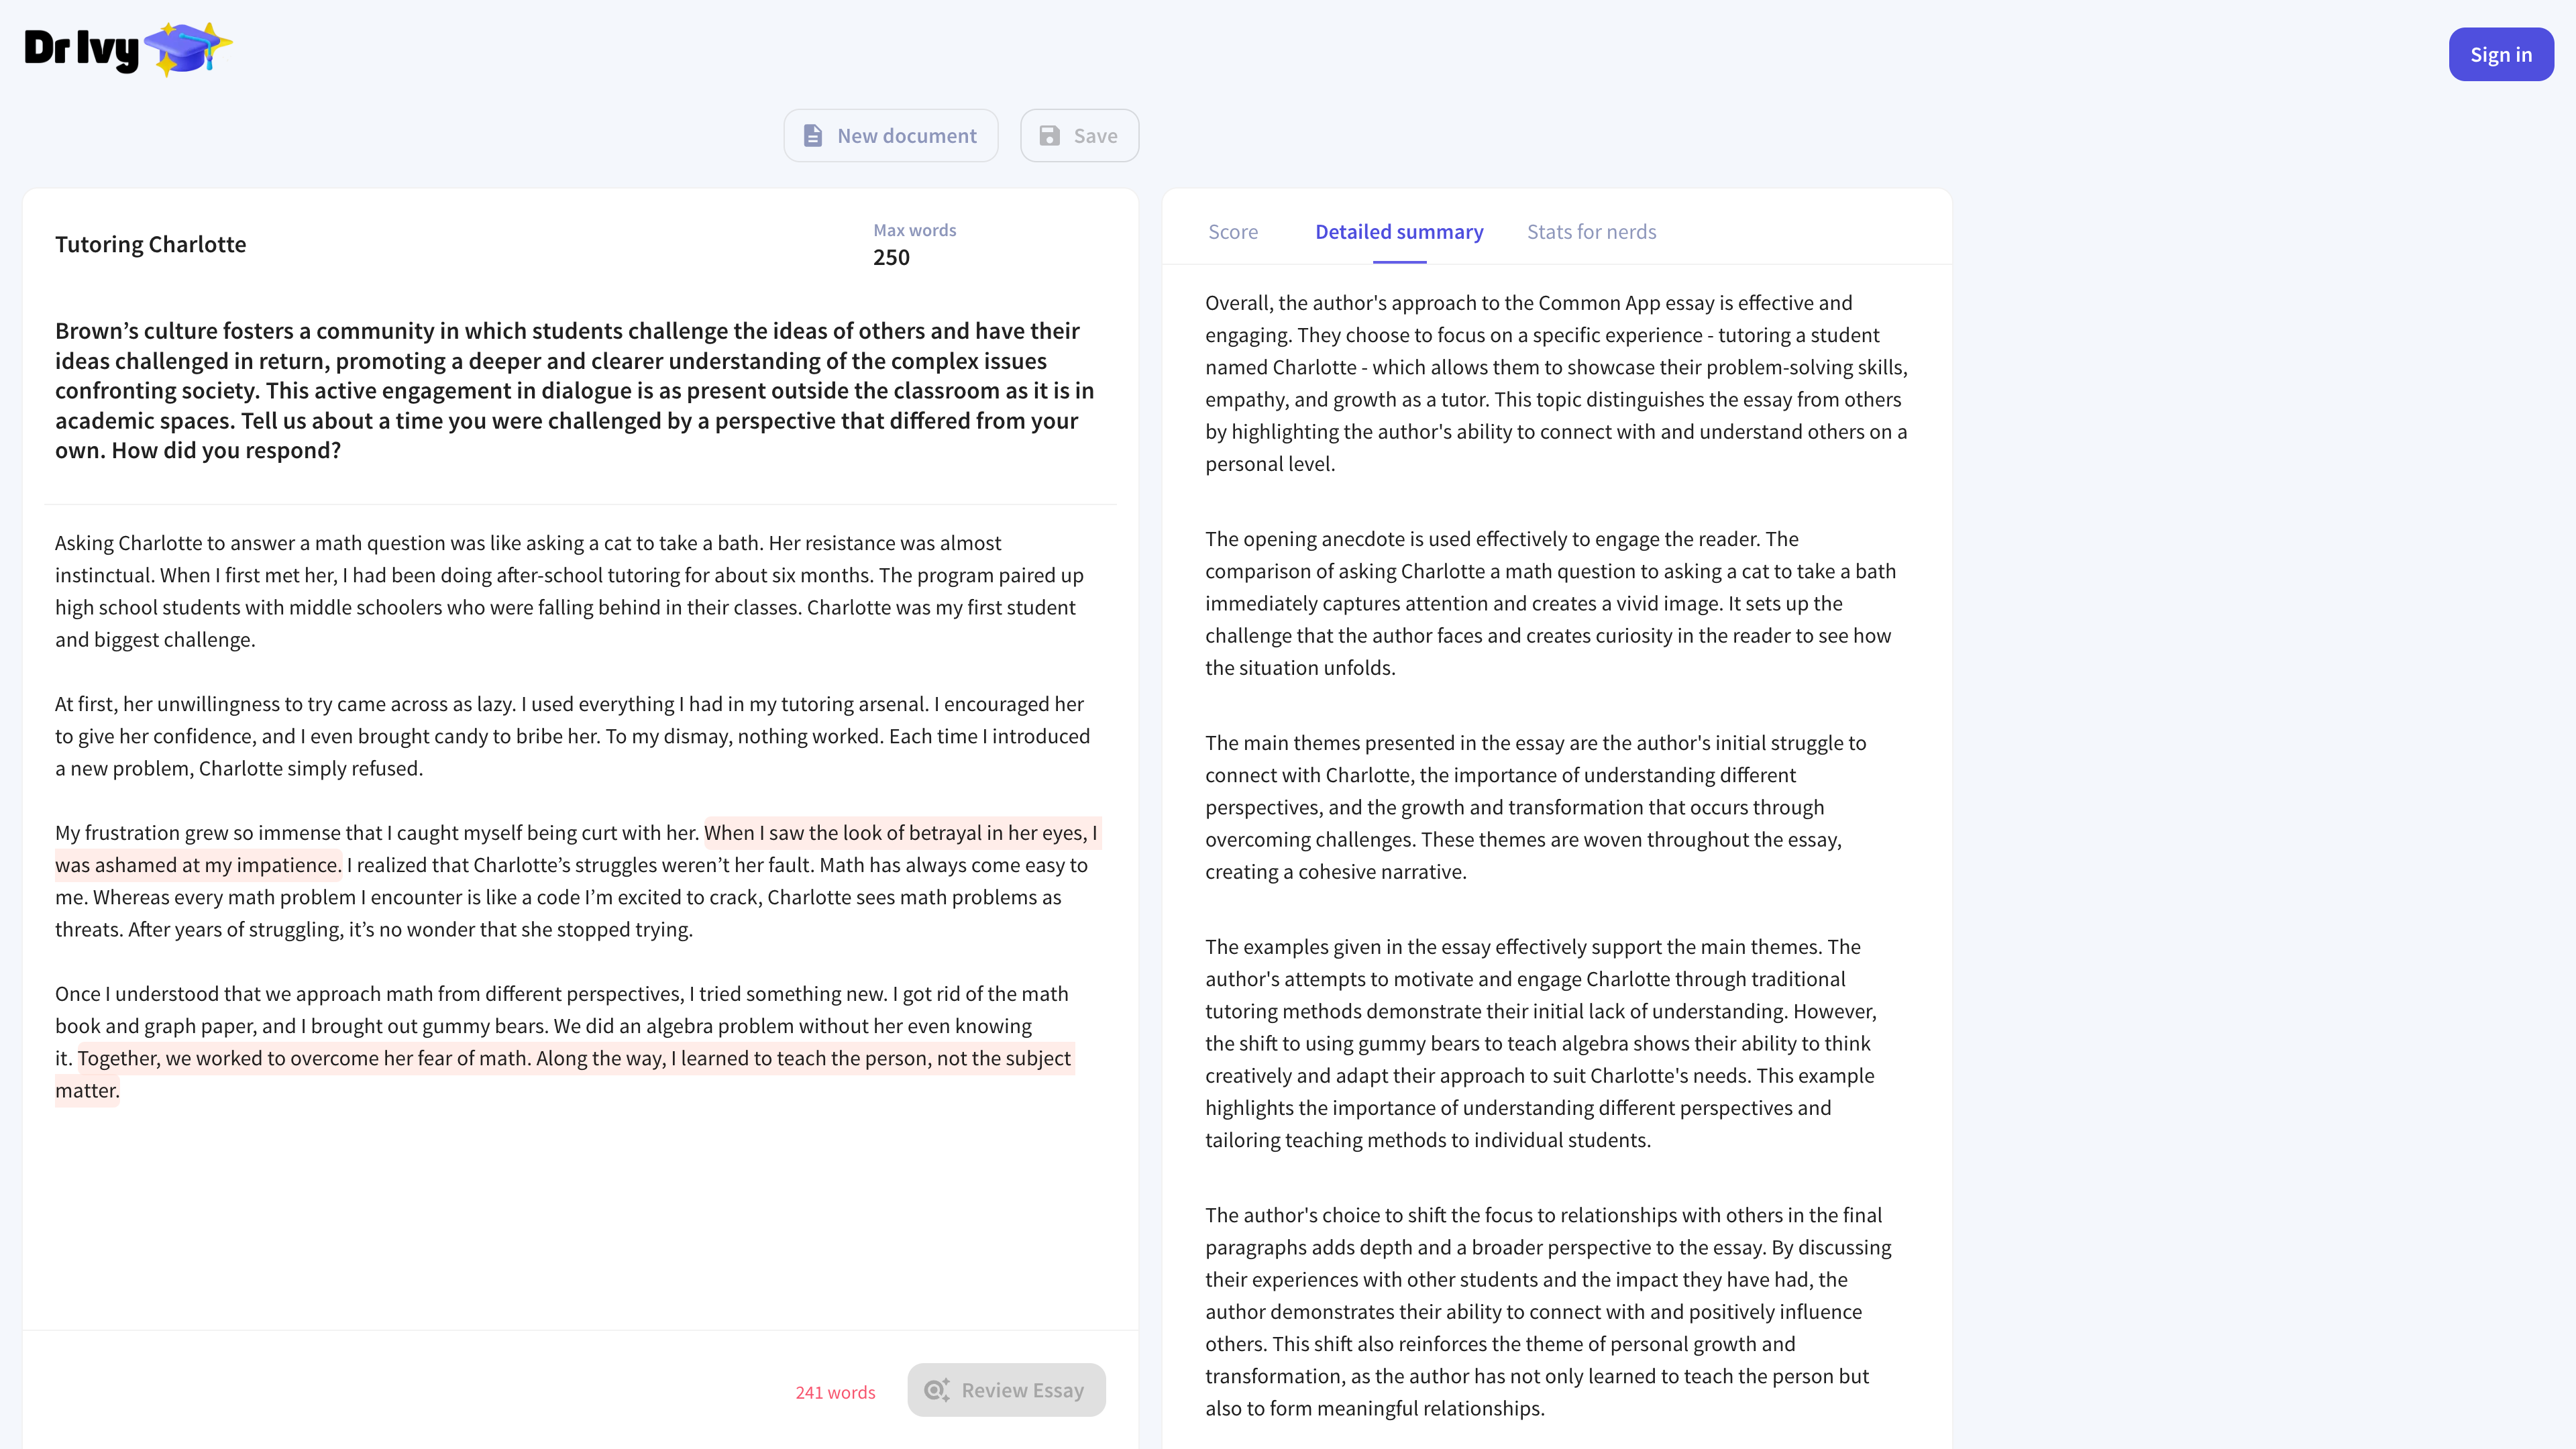 Version 2 of Dr Ivy, showcasing the long-form essay review generated by the tool